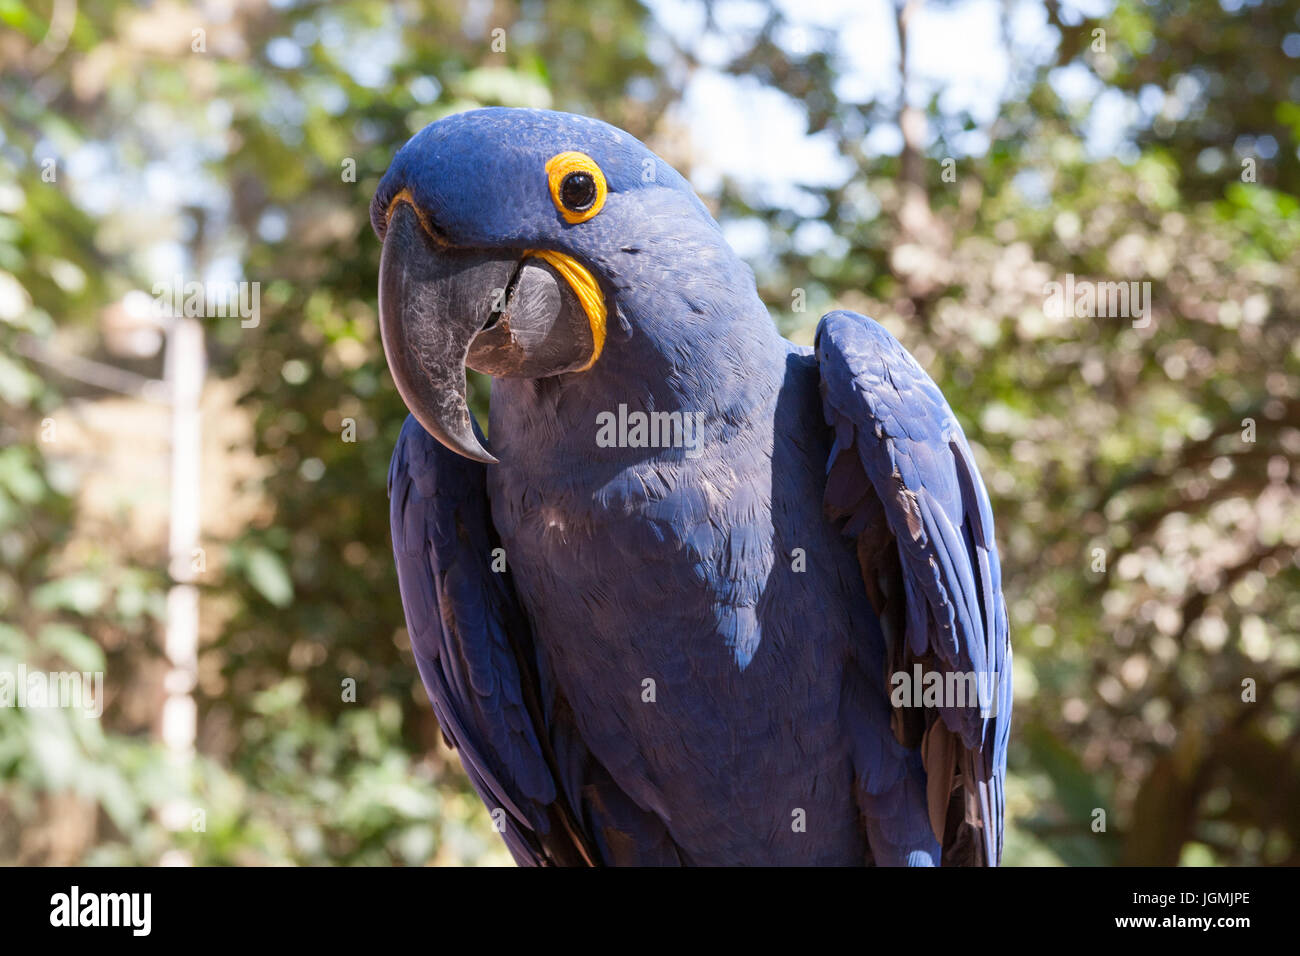 Hyacinth macaw (Anodorhynchus hyacinthinus), aka hyacinthine macaw, a parrot native to central and eastern South America, at Zoo of Asuncion, Paraguay Stock Photo